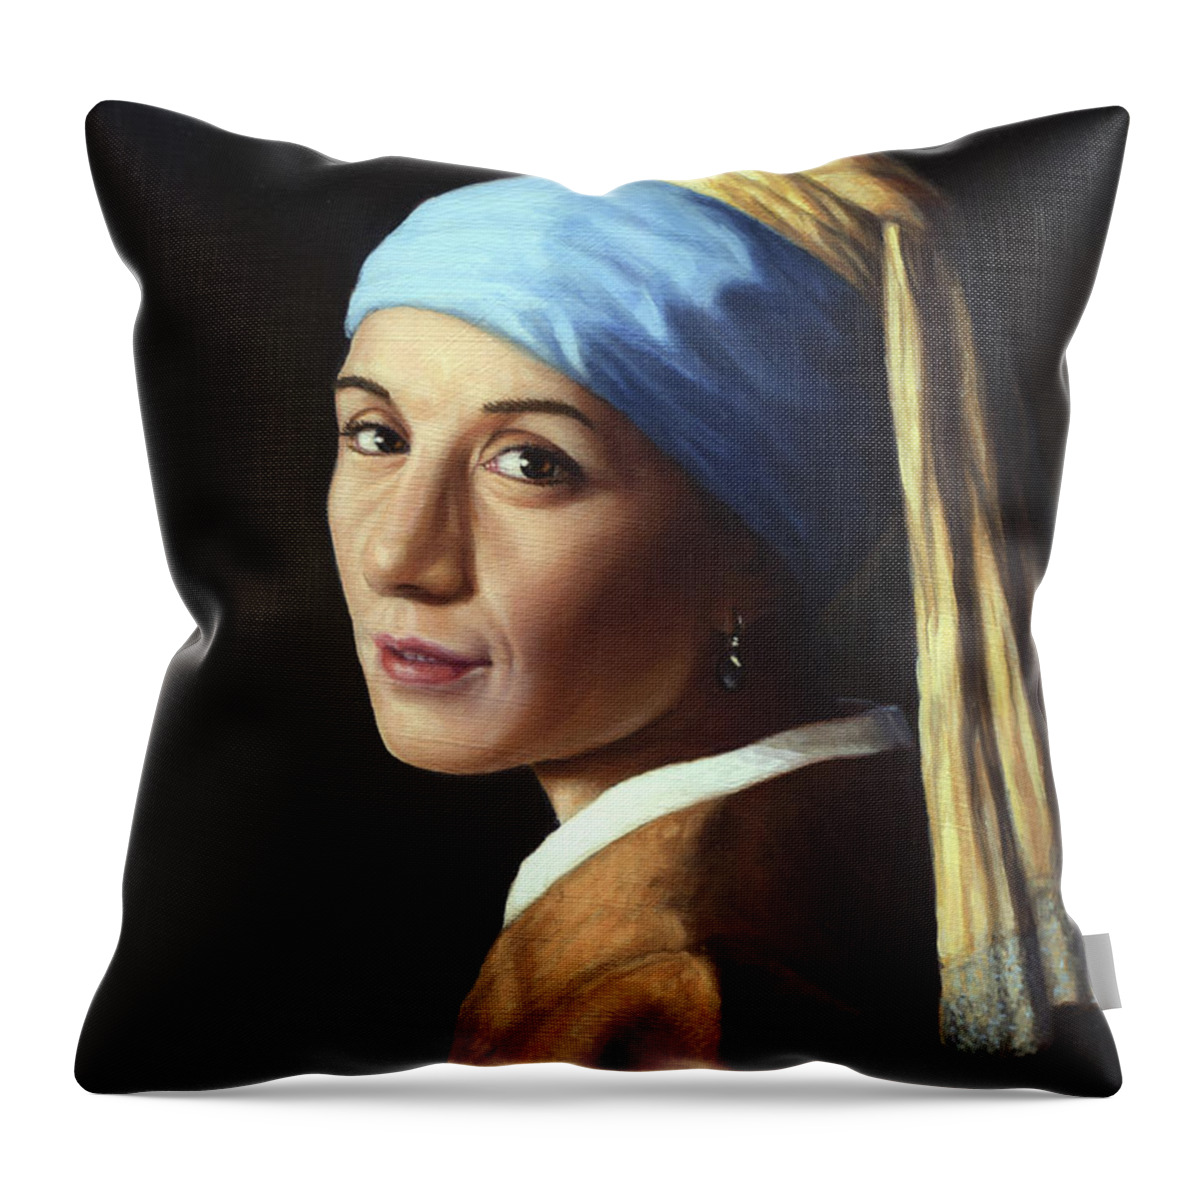 Girl With A Pearl Earring Throw Pillow featuring the painting Erika with a pearl earring by James W Johnson